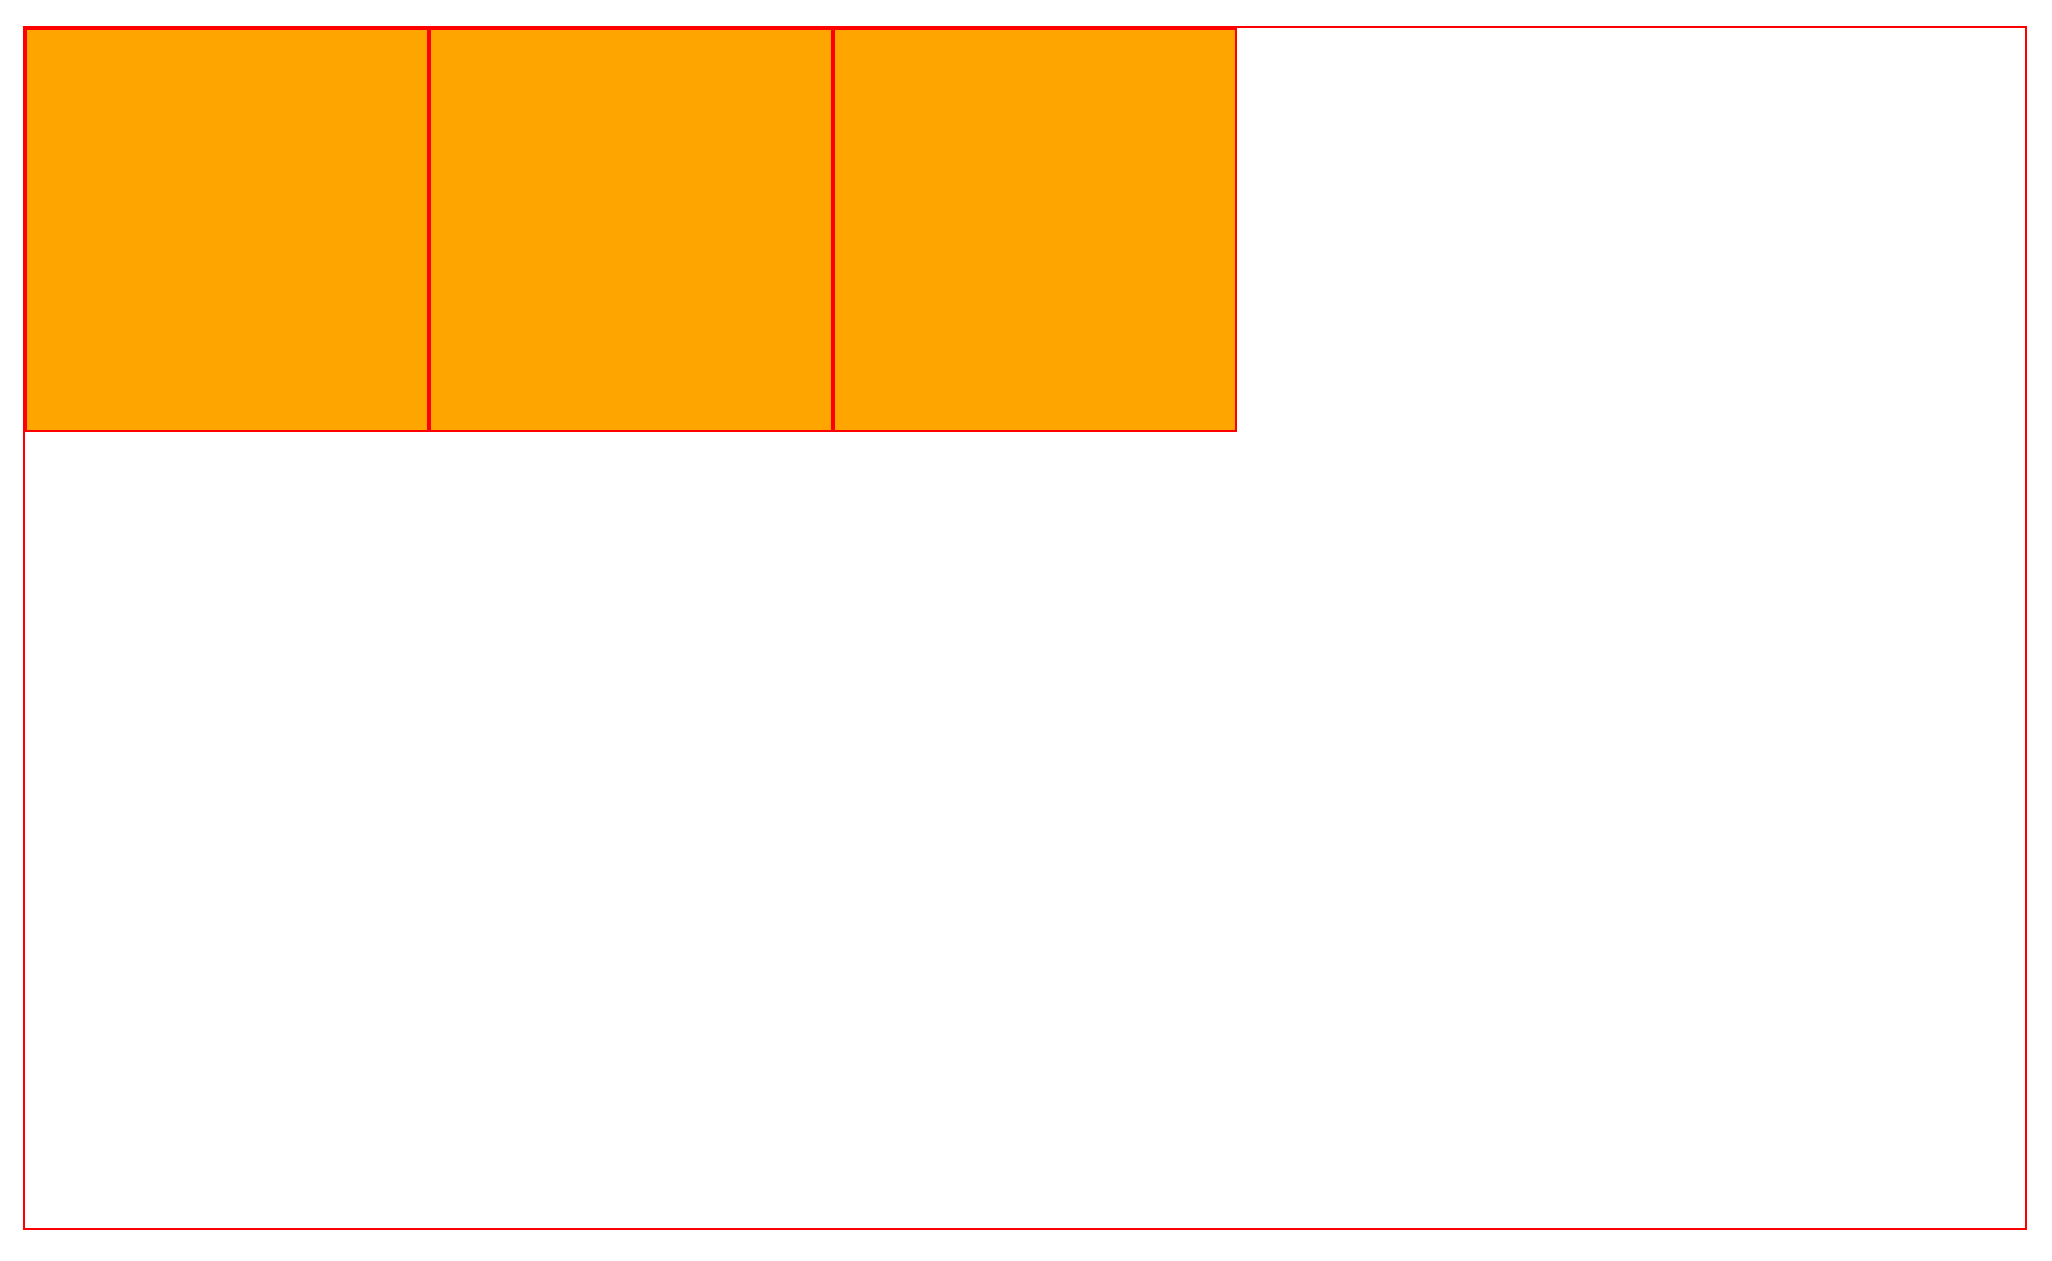 Three orange boxes adjacent to each other in a row.